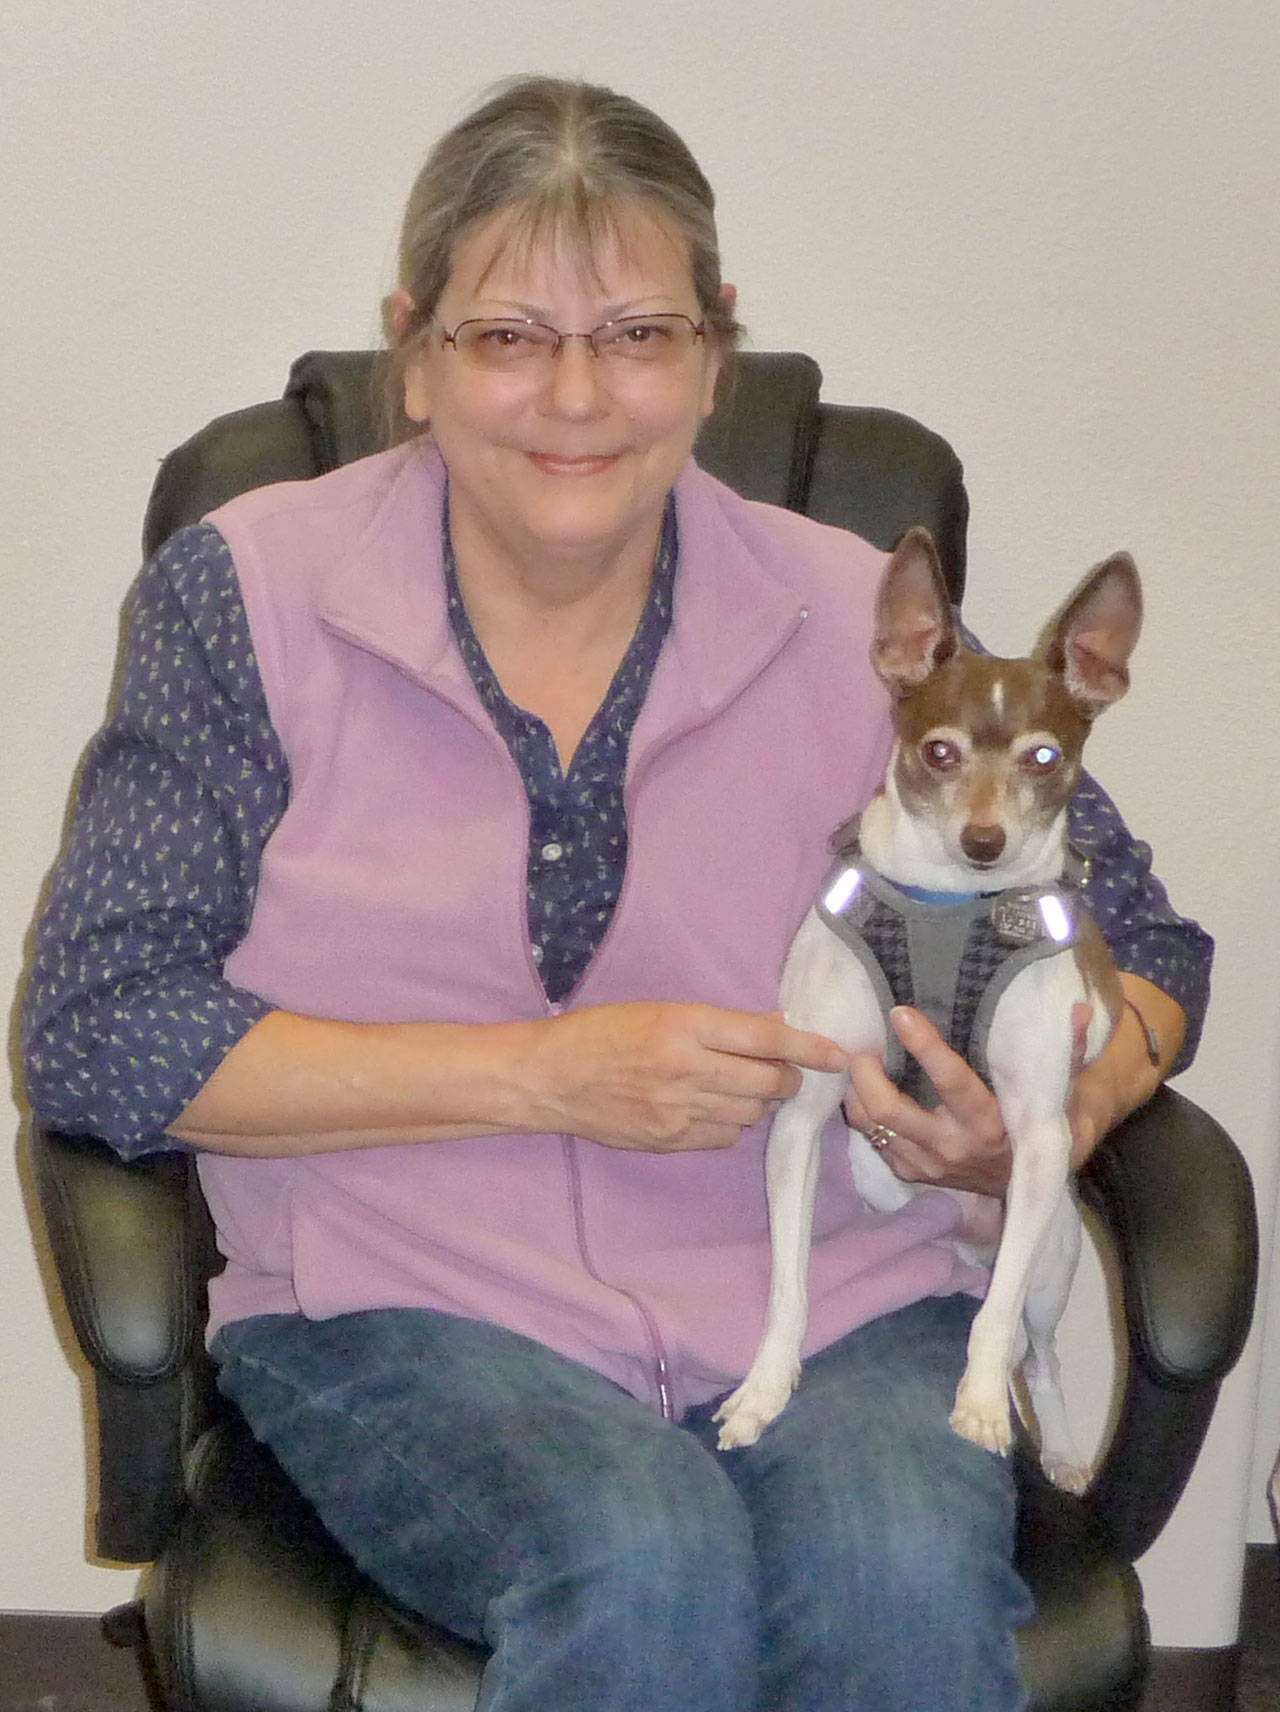 Professional pet sitter Lorre Schneider poses with her charge “Icky,” a rat terrier — so named by her young human siblings. Sequim Gazette photo by Patricia Morrison Coate